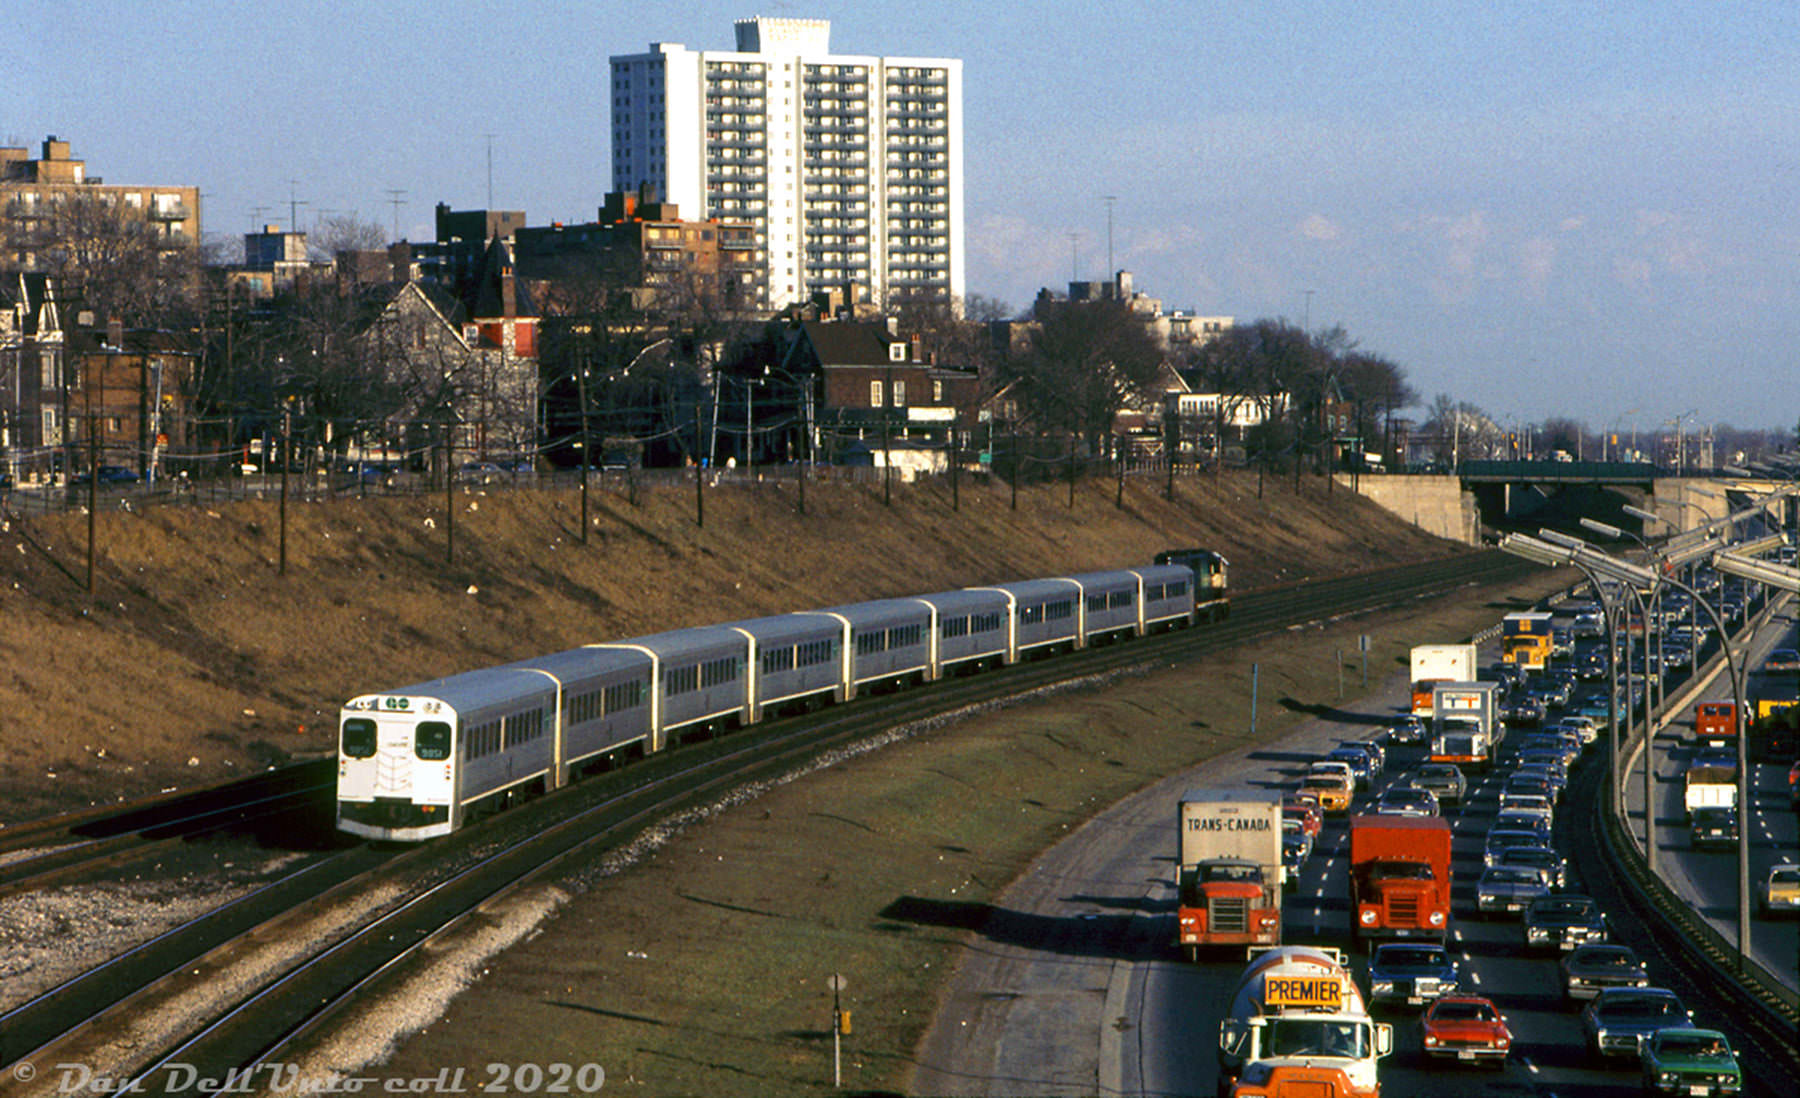 A grungy March 1973 view along the Gardiner Expressway at Sunnyside, showing an inbound GO train heading to Union Station as PM rush hour traffic inches along the Gardiner out of the city.